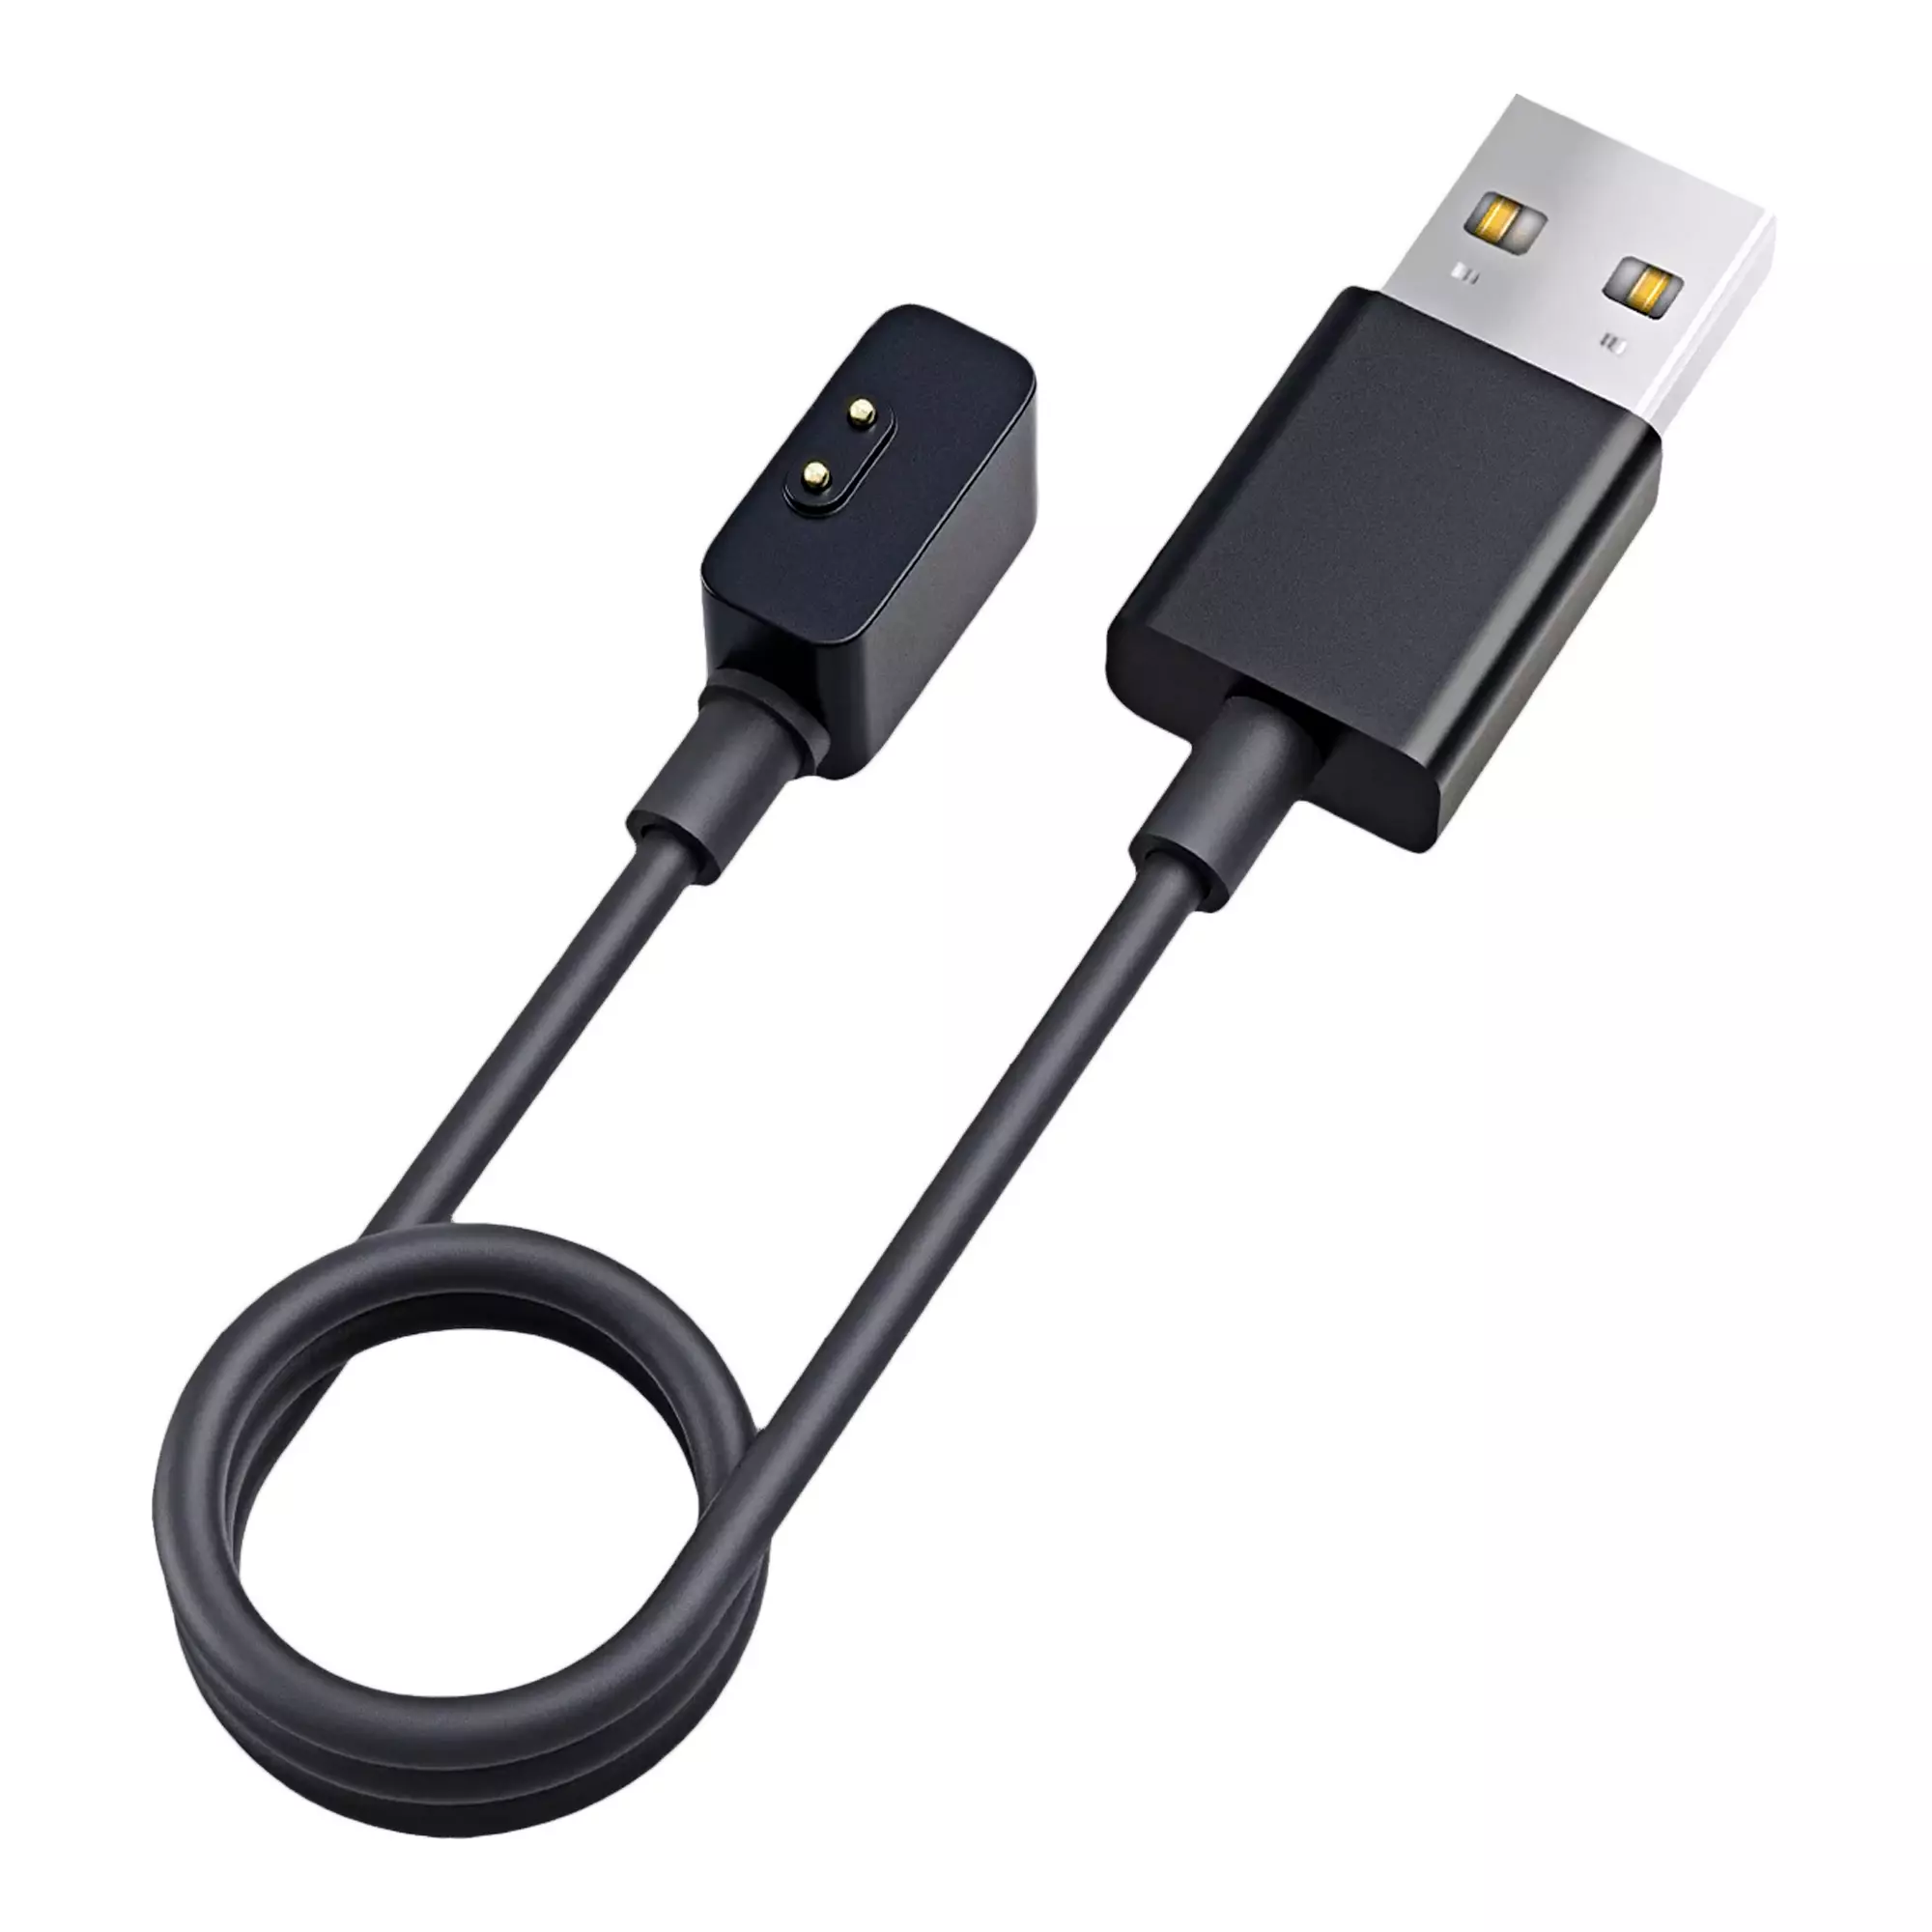 Кабель Xiaomi Magnetic Charging Cable for Wearables